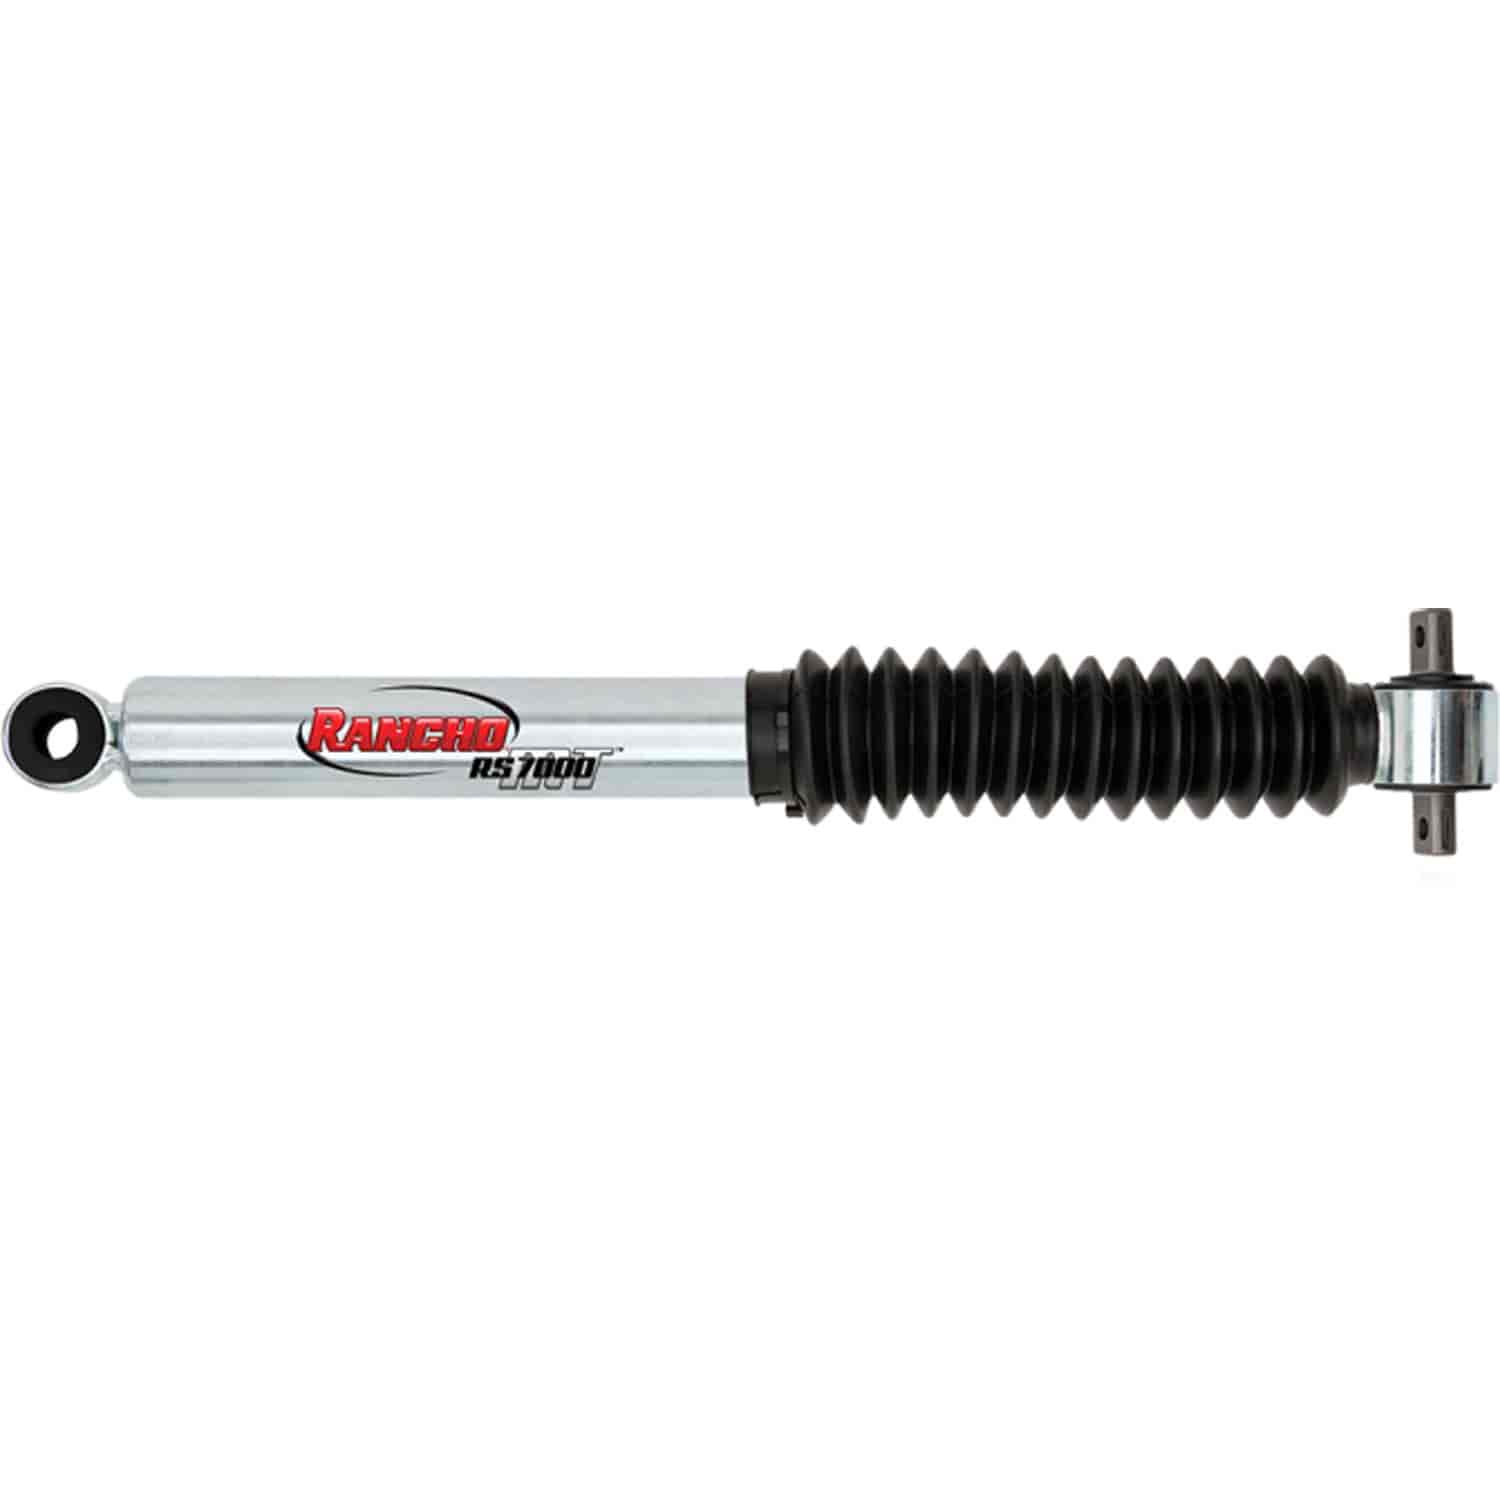 RS7000MT Rear Shock Fits Jeep Cherokee and Wagoneer